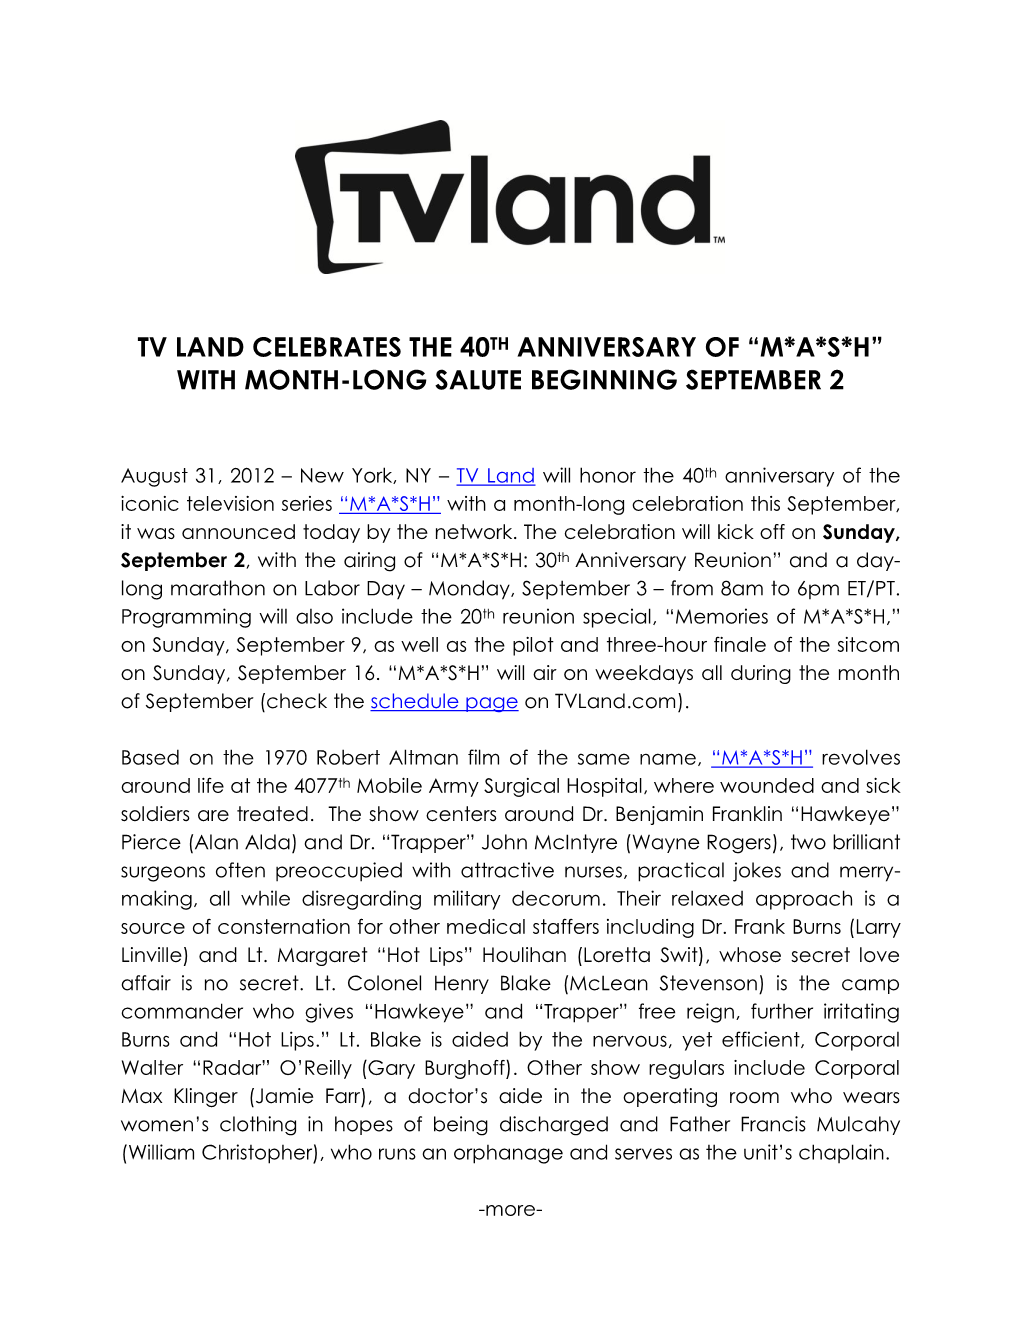 Tv Land Celebrates the 40Th Anniversary of “M*A*S*H” with Month-Long Salute Beginning September 2